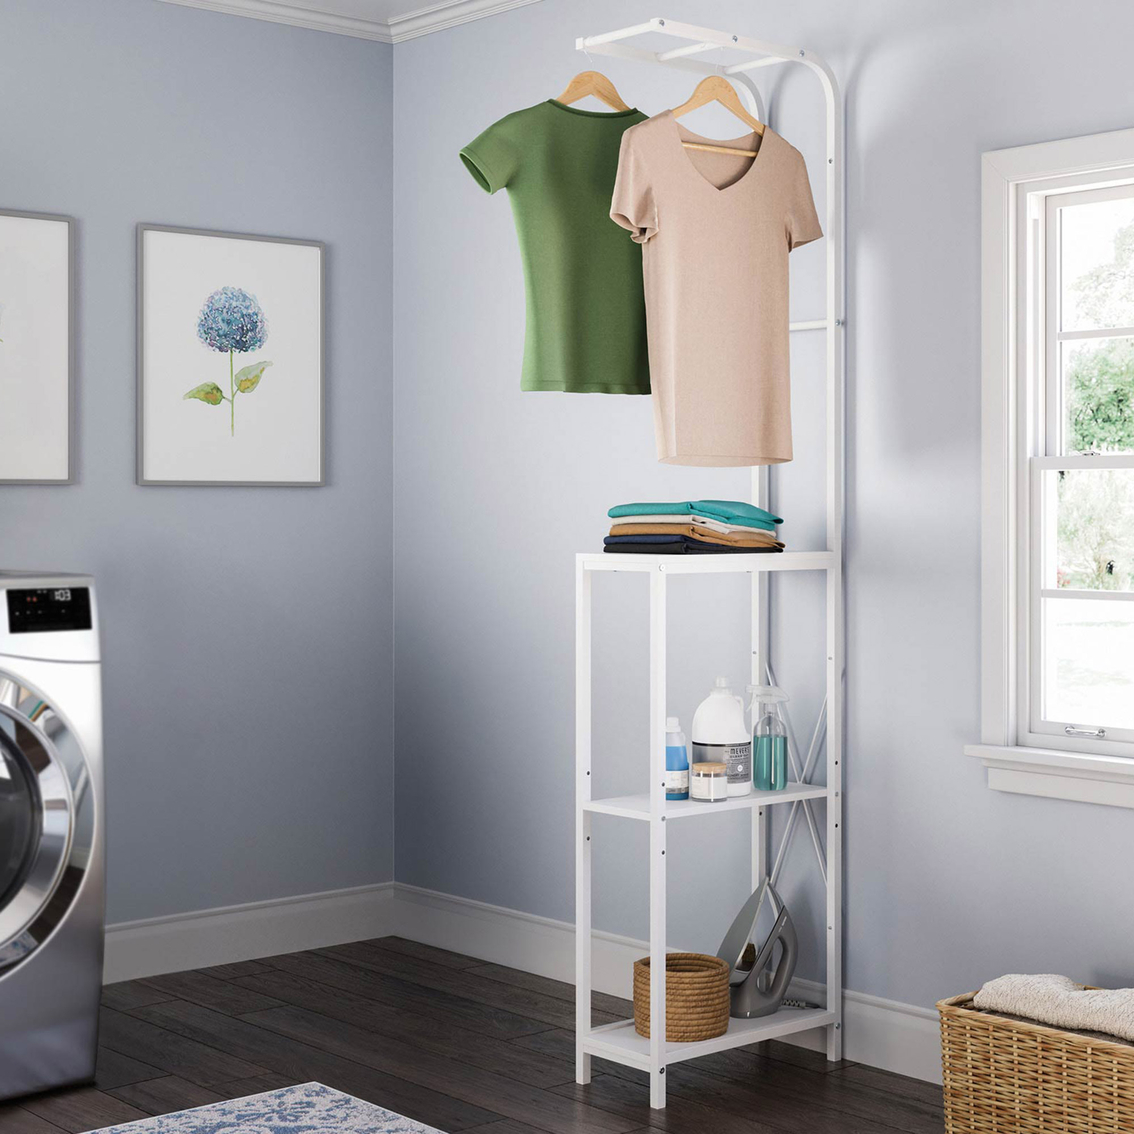 Sauder North Avenue Compact White Laundry Stand and Drying Rack - Image 1 of 5